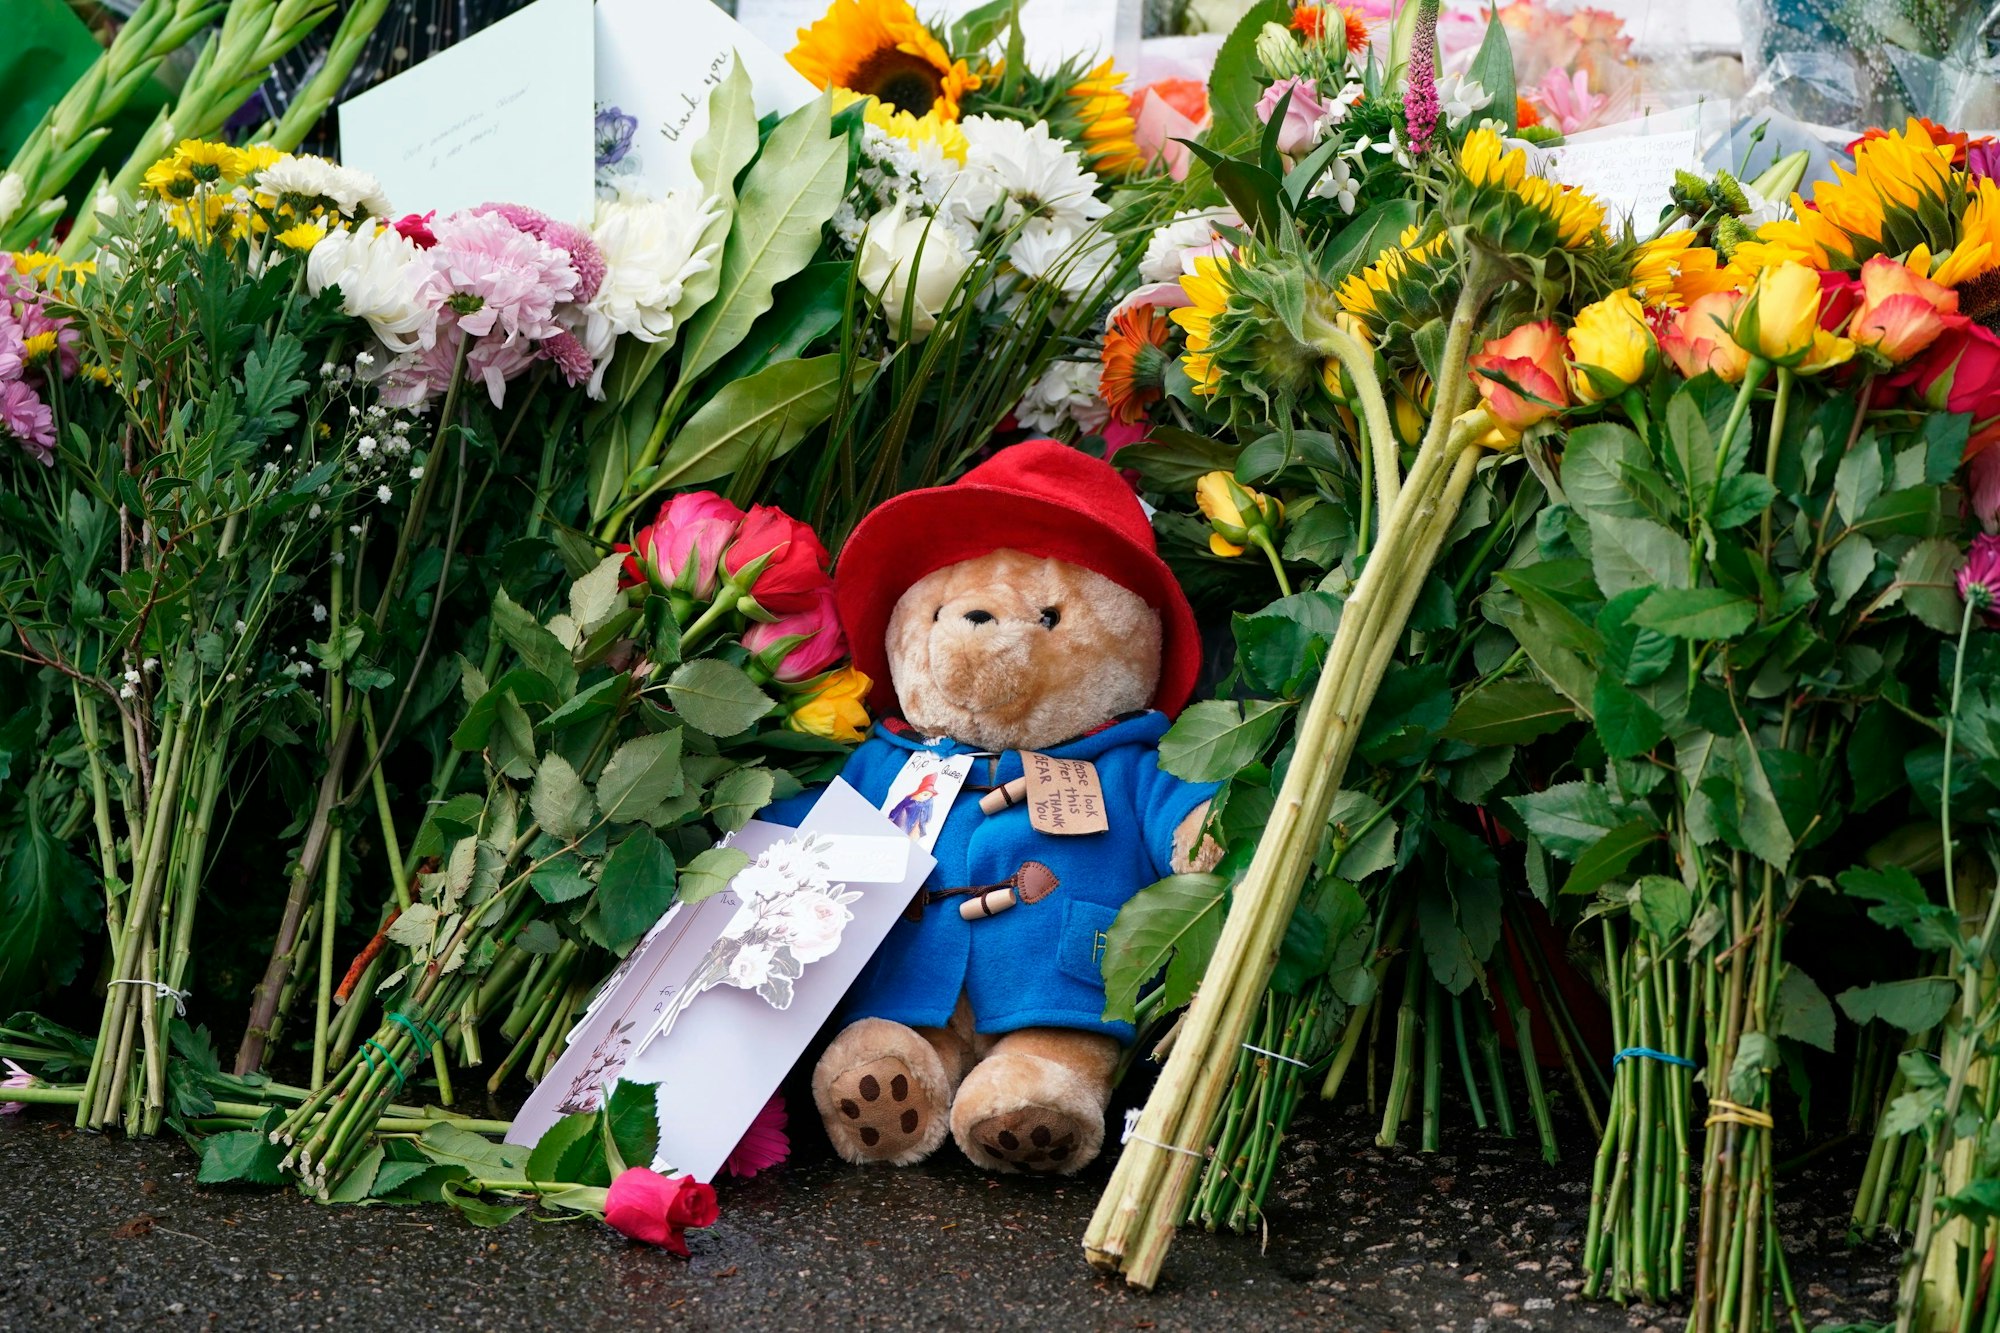 Floral tributes and a Paddington bear teddy are laid at the gates of Balmoral in Scotland, Friday, Sept. 9, 2022, following the death of Queen Elizabeth II on Thursday. (Andrew Milligan/PA via AP)